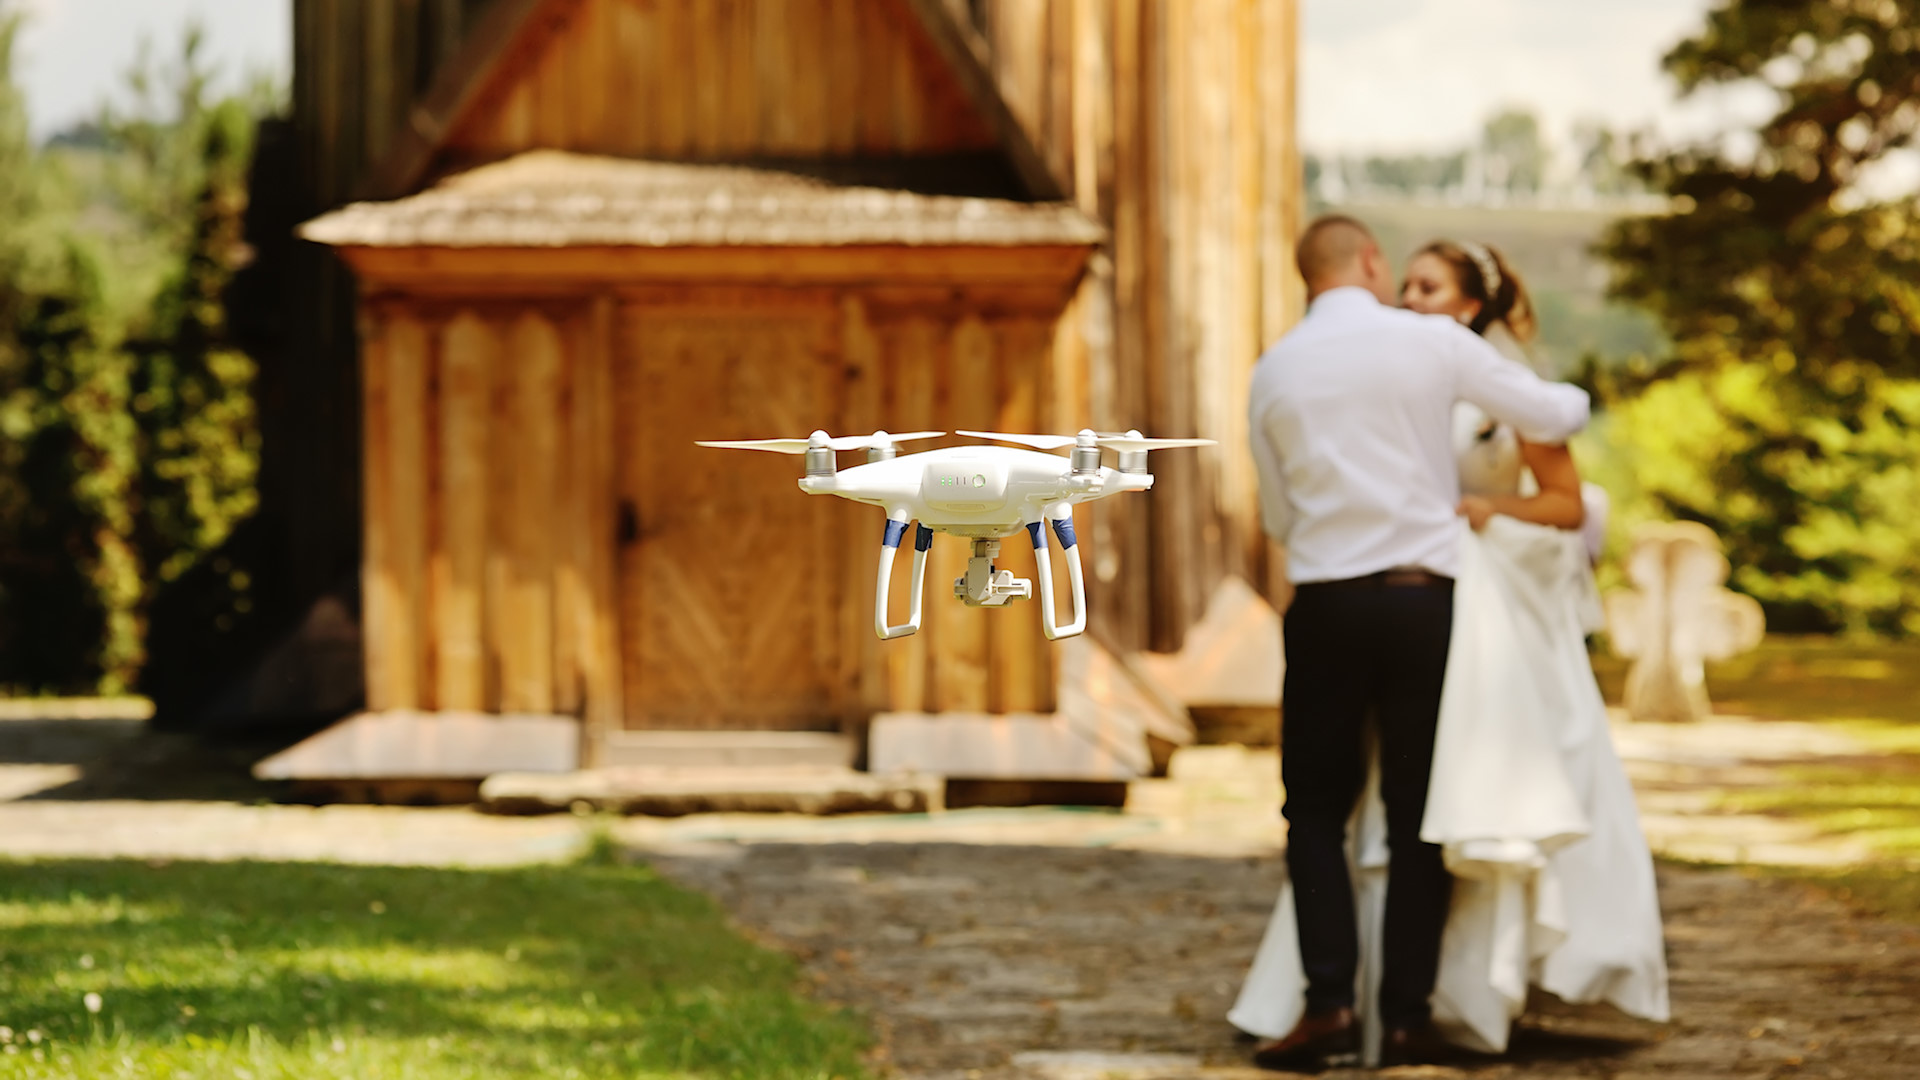 Drone wedding videography – A must-have for modern weddings